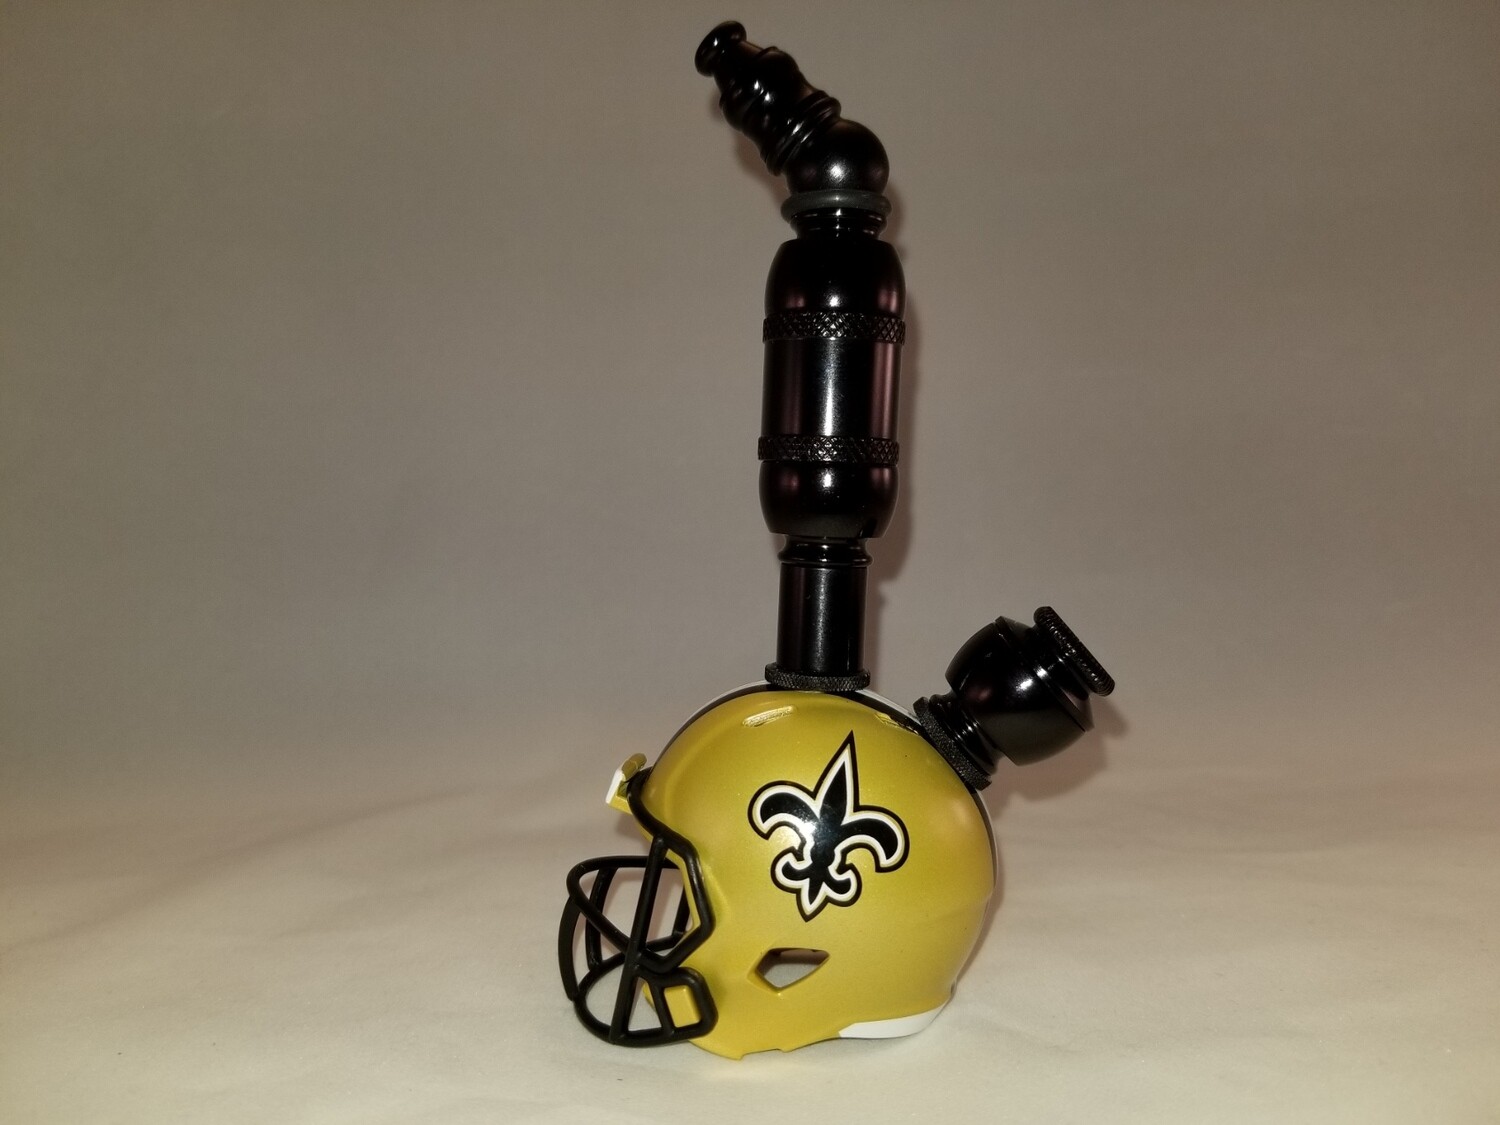 NEW ORLEANS SAINTS "BAD ASS" NFL FOOTBALL HELMET SMOKING PIPE Upright/Black Anodized